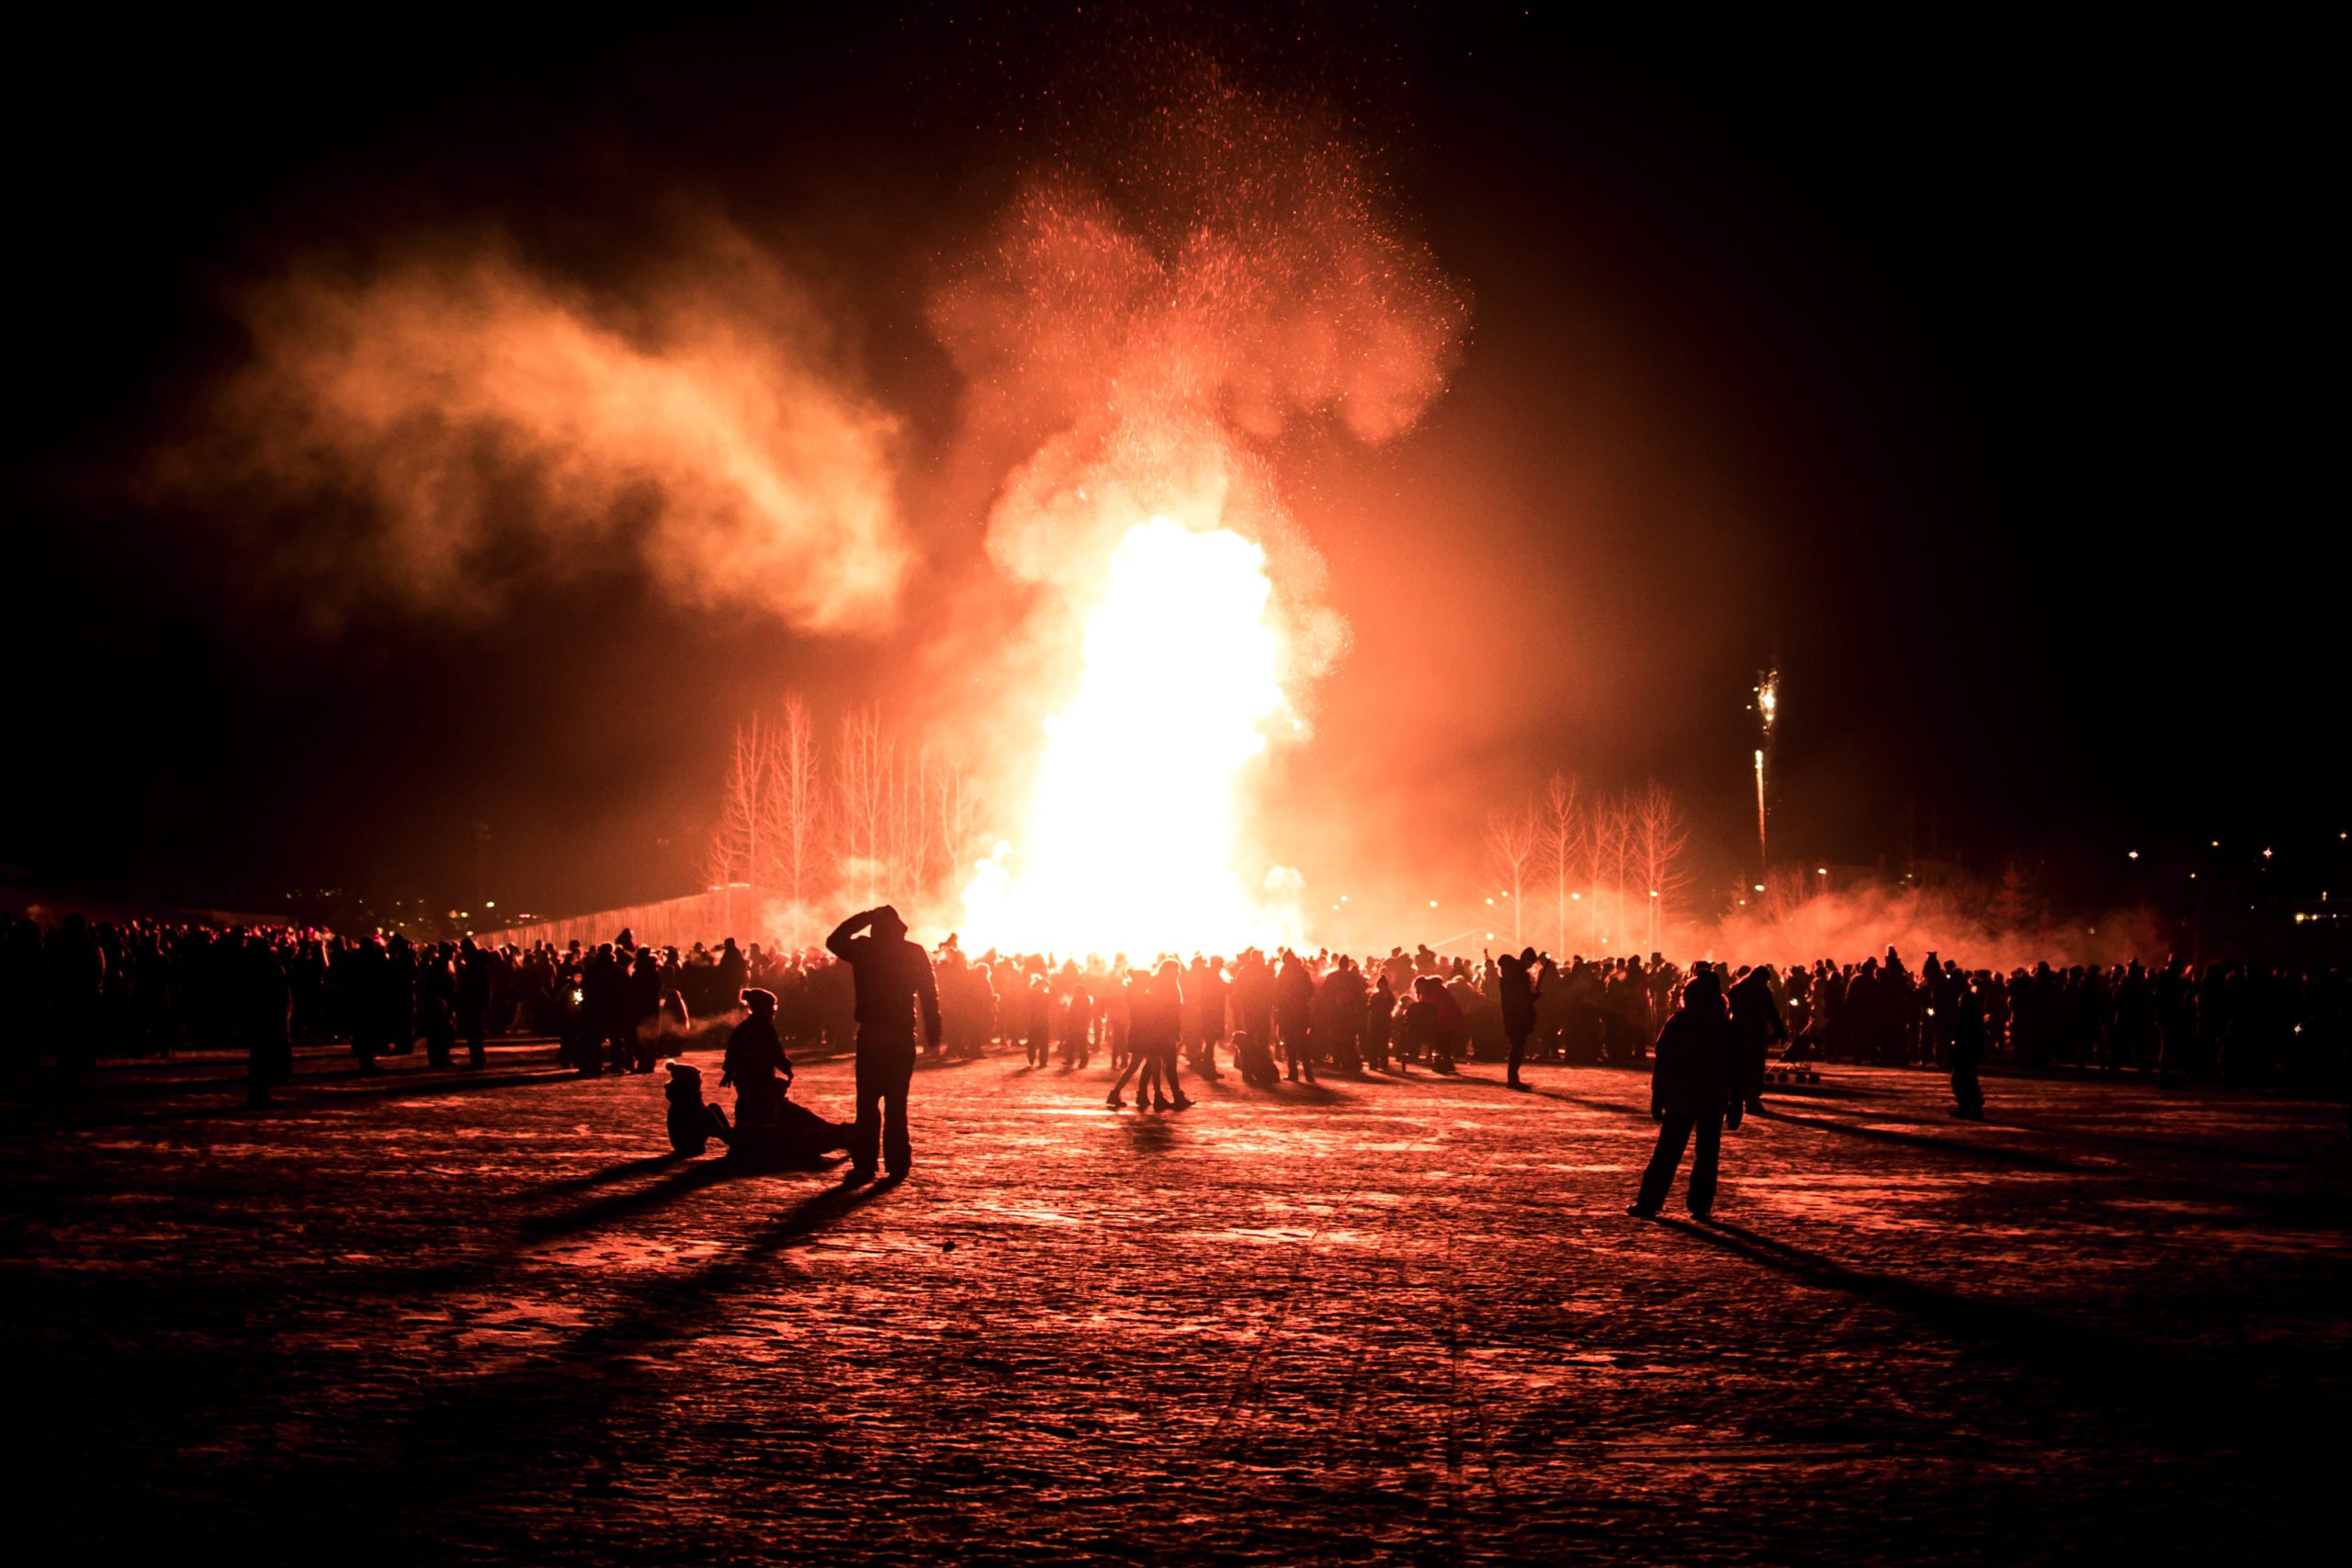 Stop At One Of The Biggest Bonfires In The Capital Area In Our New Year's Eve Bonfire Tour